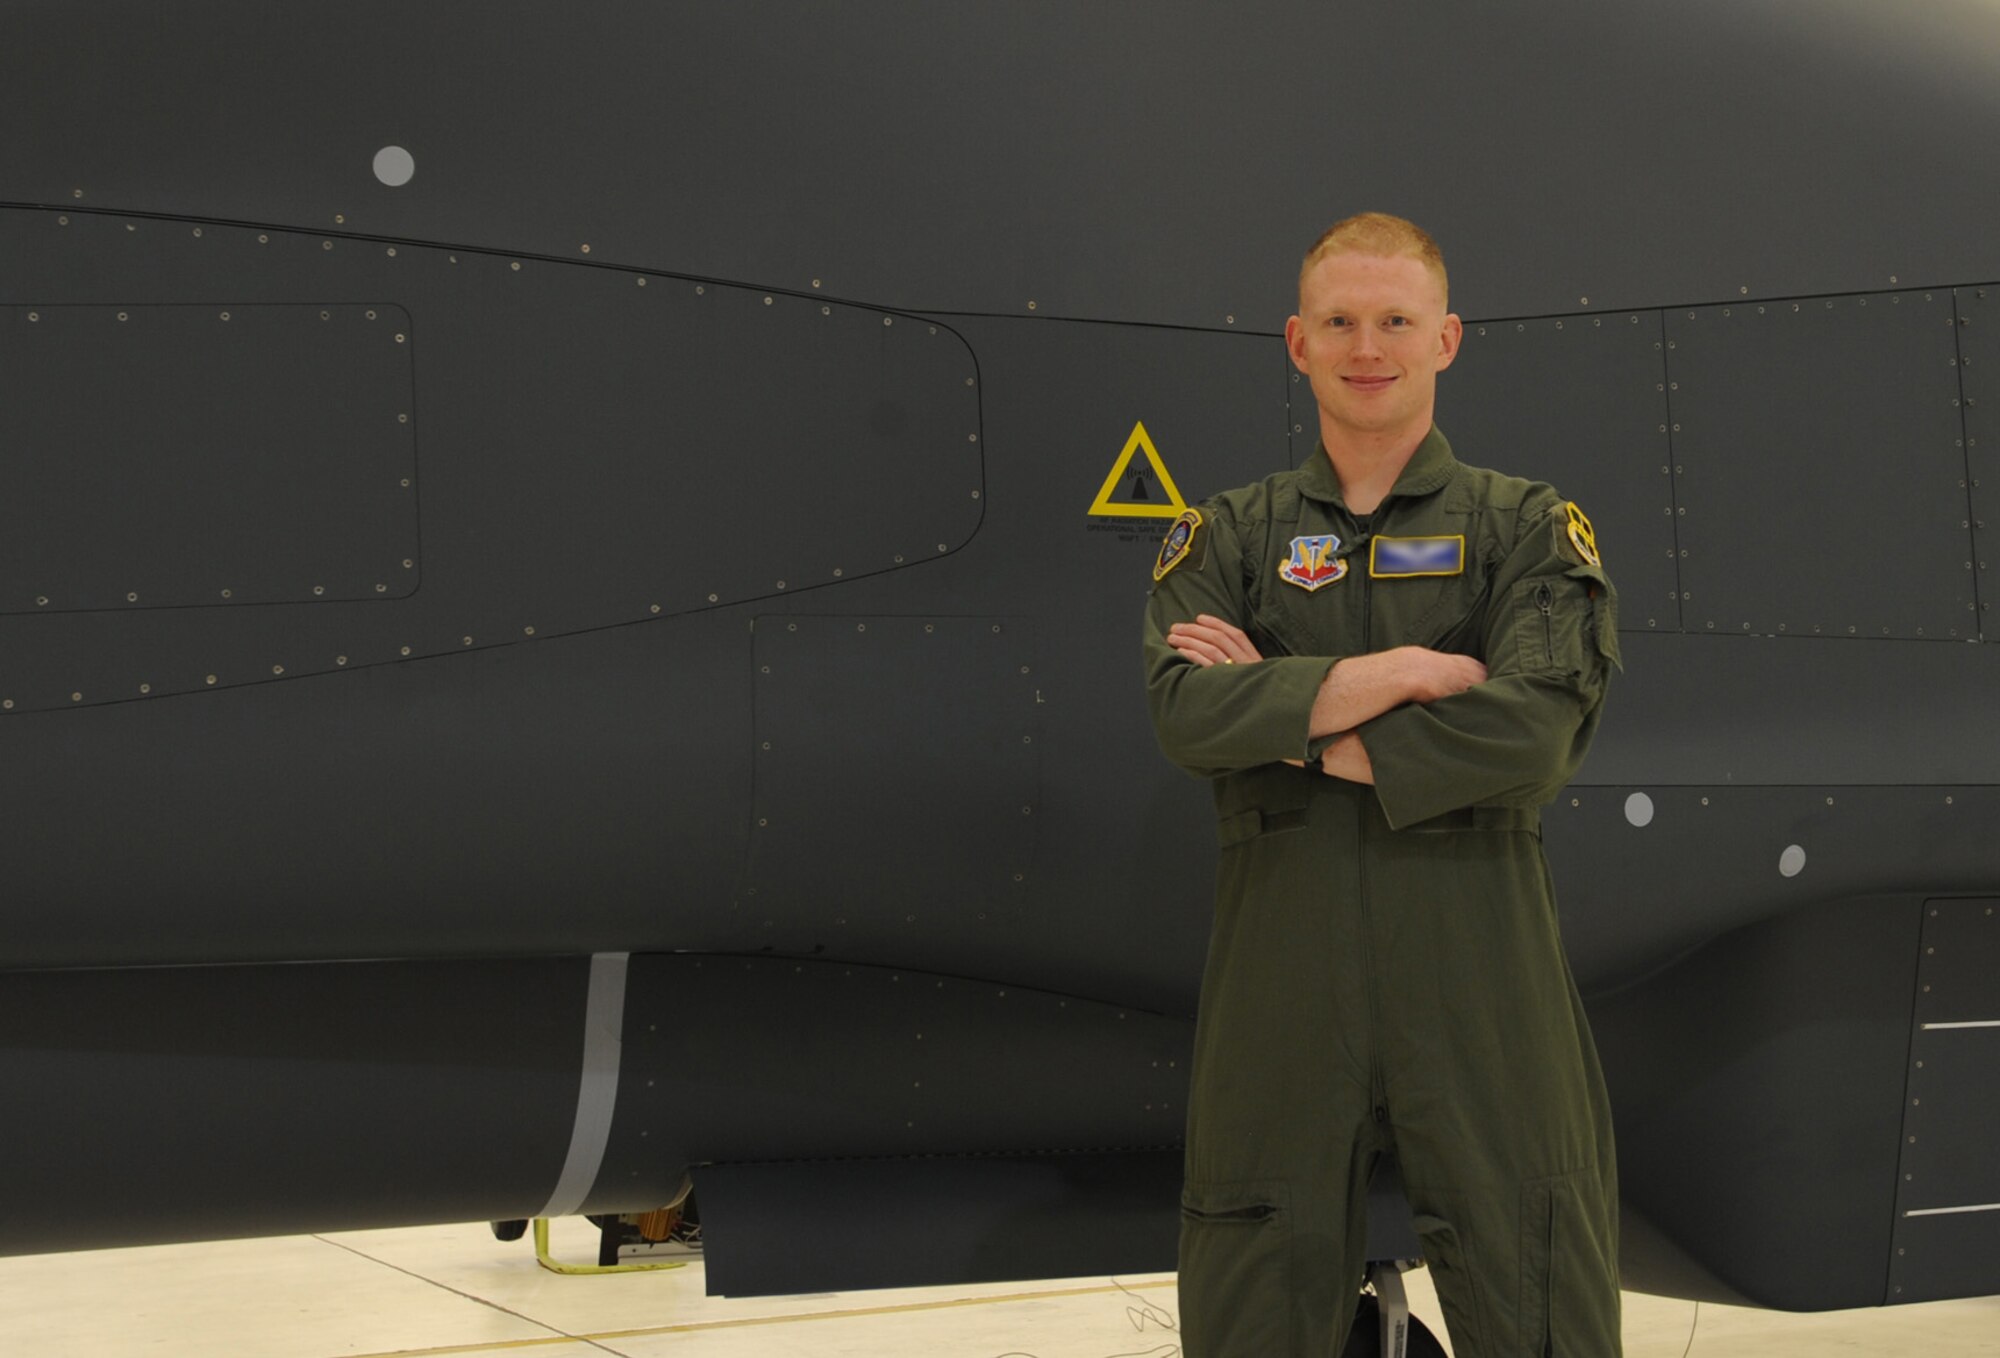 1st Lt. Peterson, 348th Reconnaissance Squadron, stands in front of a RQ-4 Globalhawk at Grand Forks Air Force Base, North Dakota, Sept. 8, 2014. Peterson was nominated by his command to be the Warrior of the Week for the second week of September. (U.S. Air Force photo by Senior Airman Desiree Economides/Released)